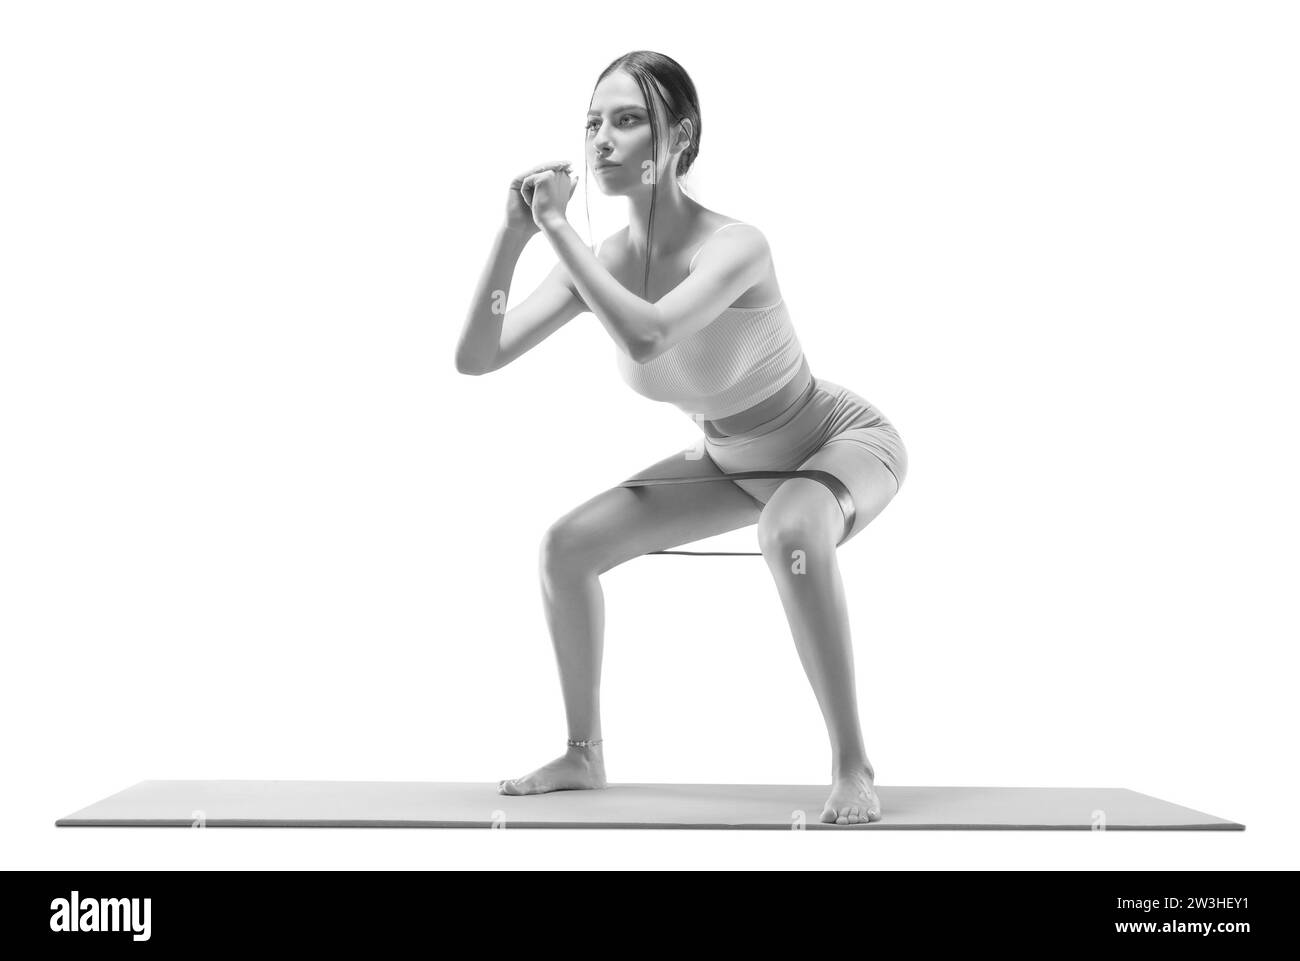 Image of an athletic girl squatting with an elastic band on a mat. The concept of shaping, pilates, stretching. Mixed media Stock Photo